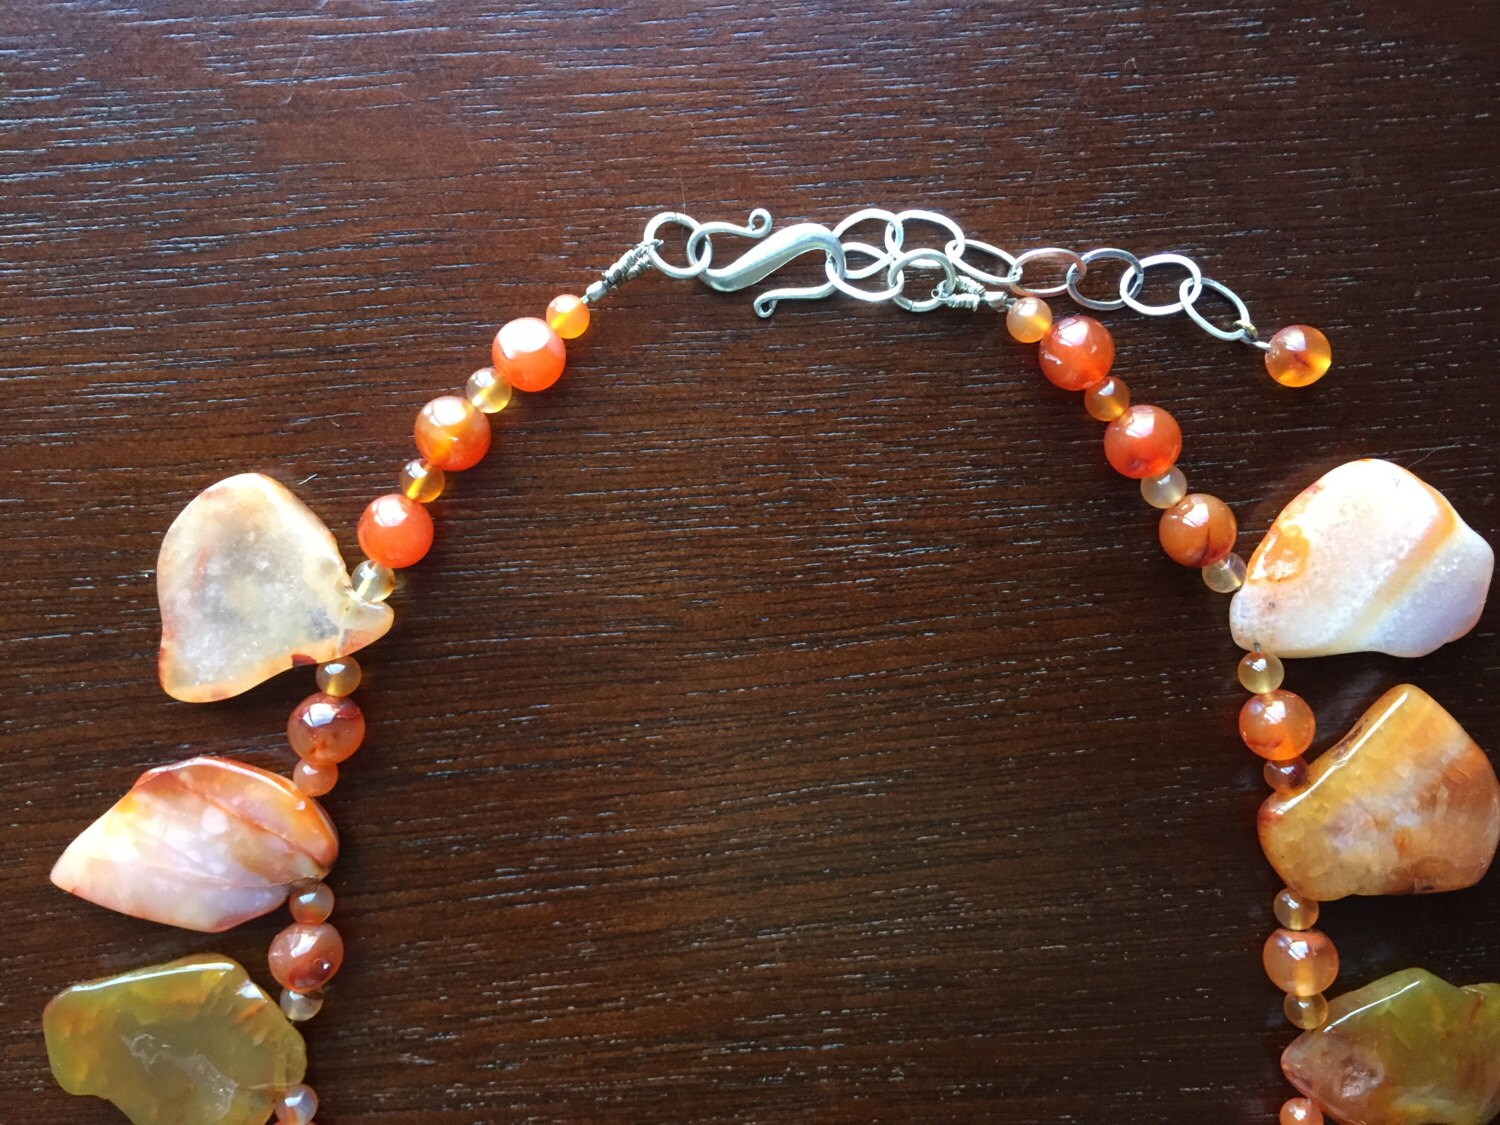 Carnelian Necklace With Dragon's Vein Pendant Free - Etsy